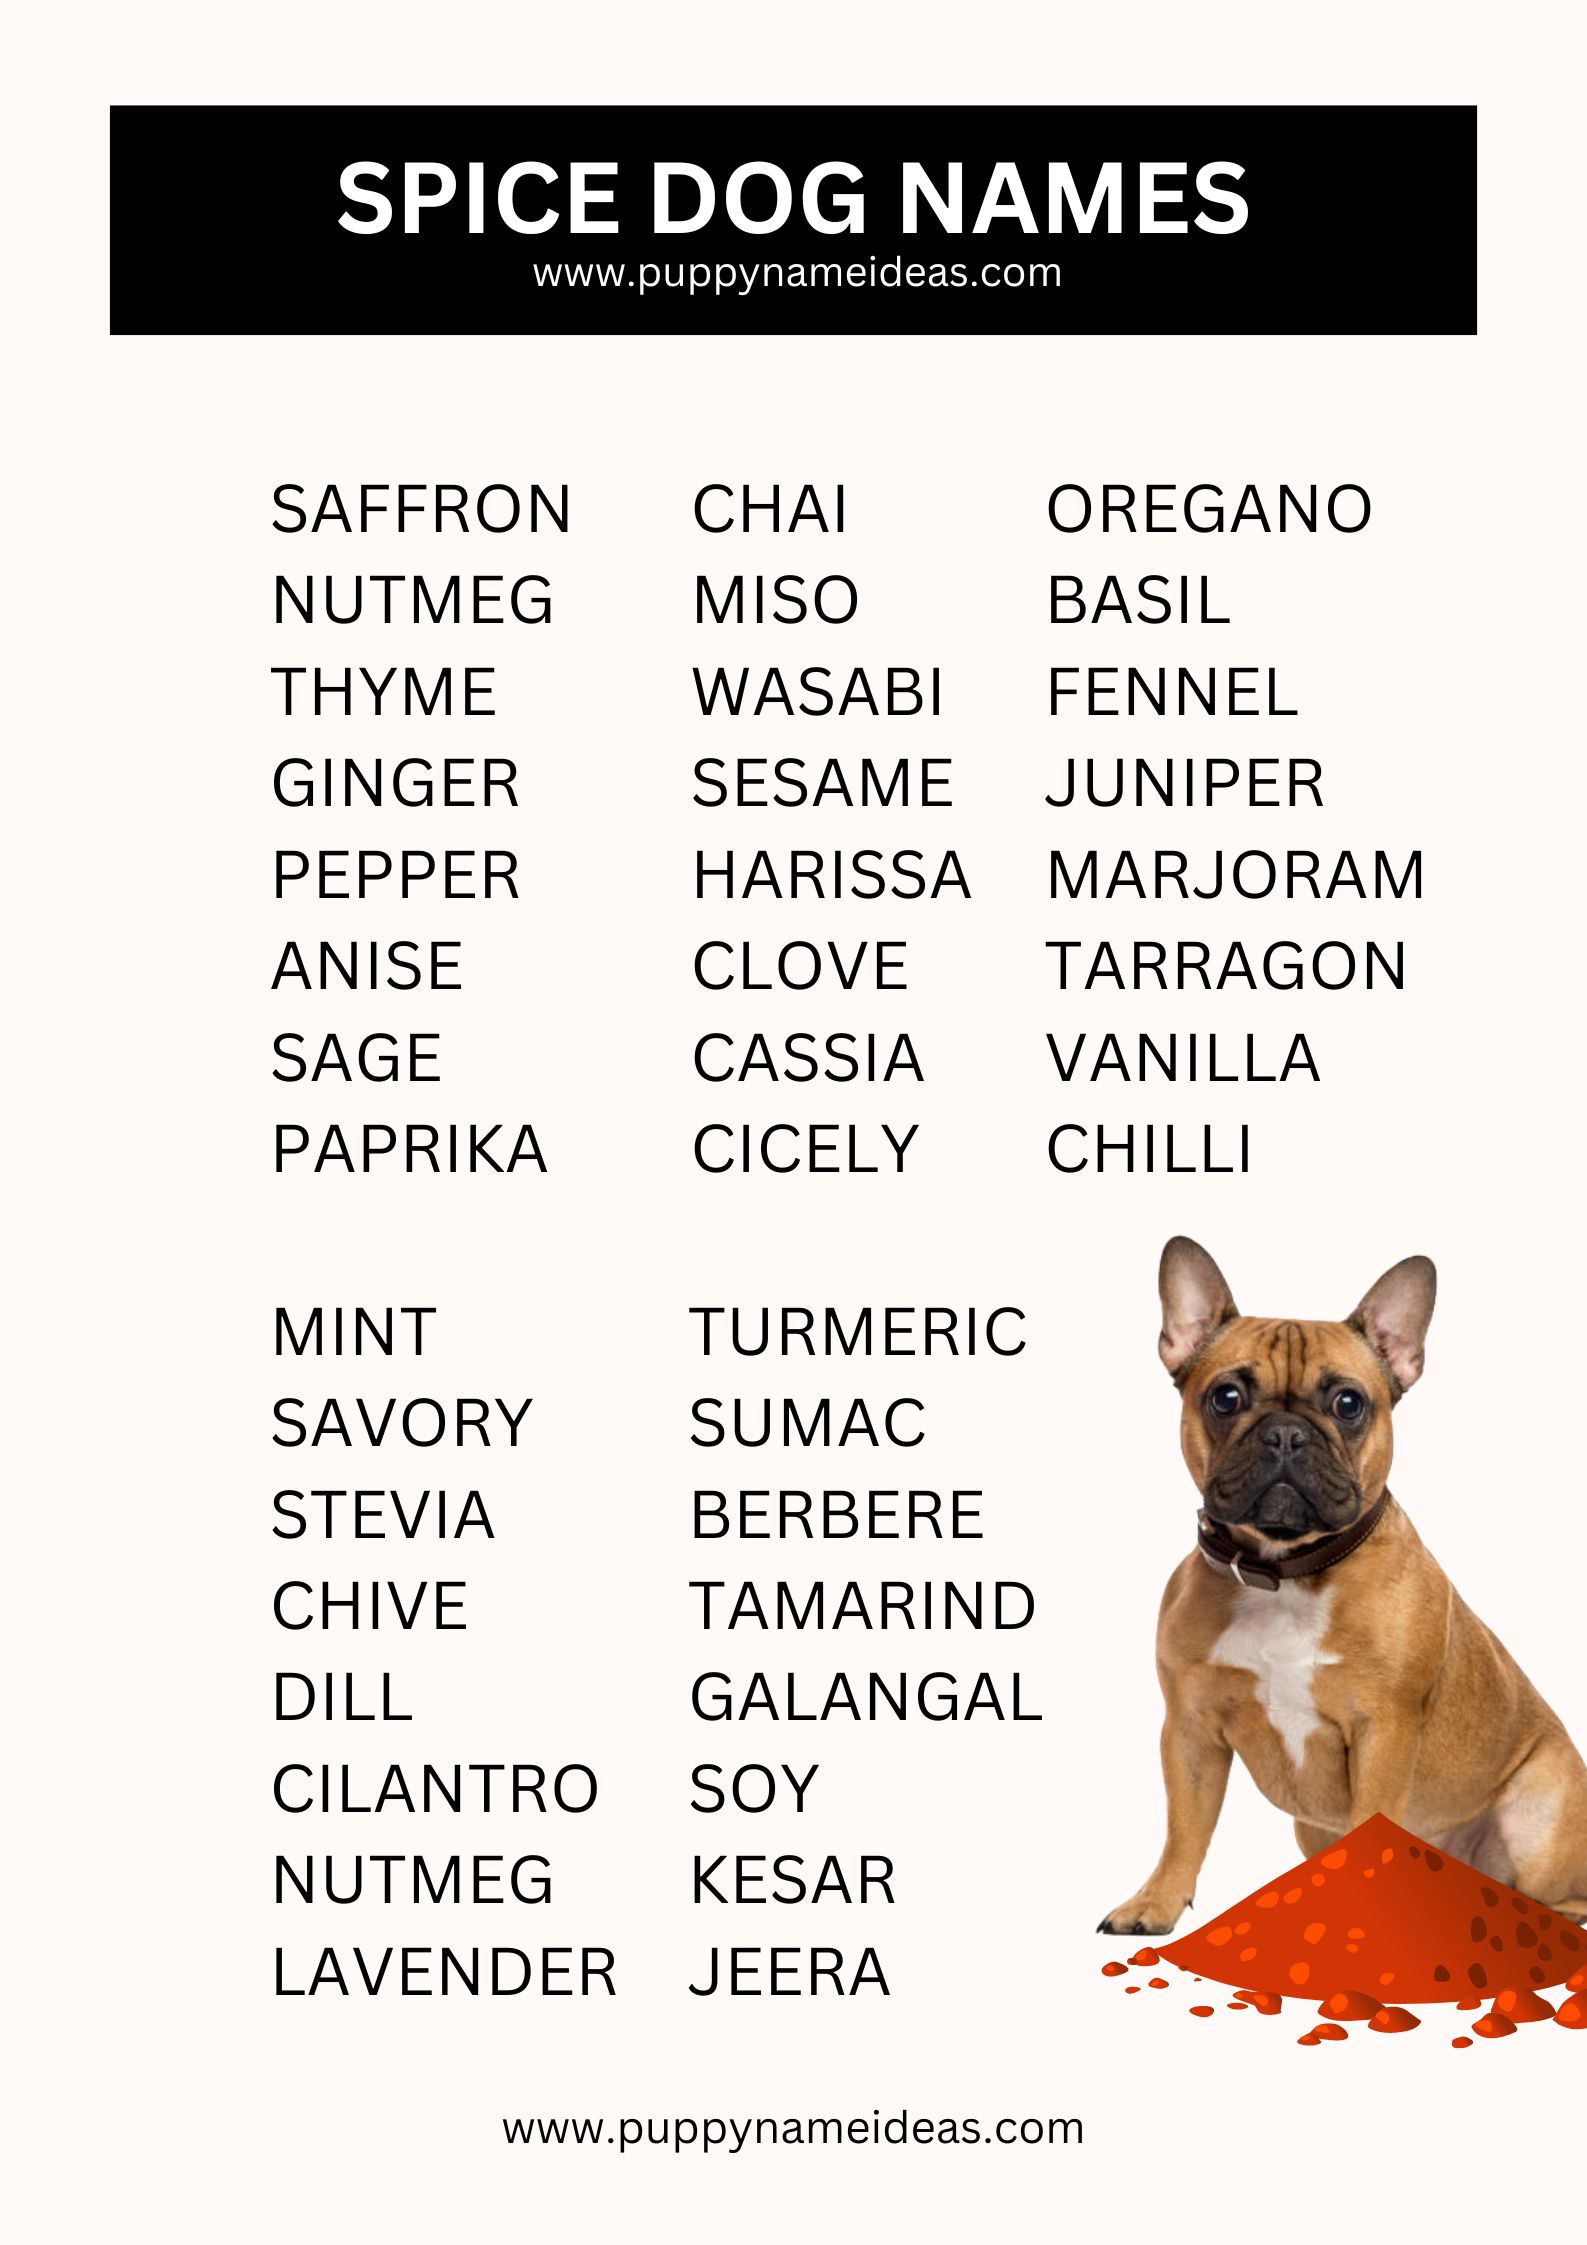 list of spice dog names